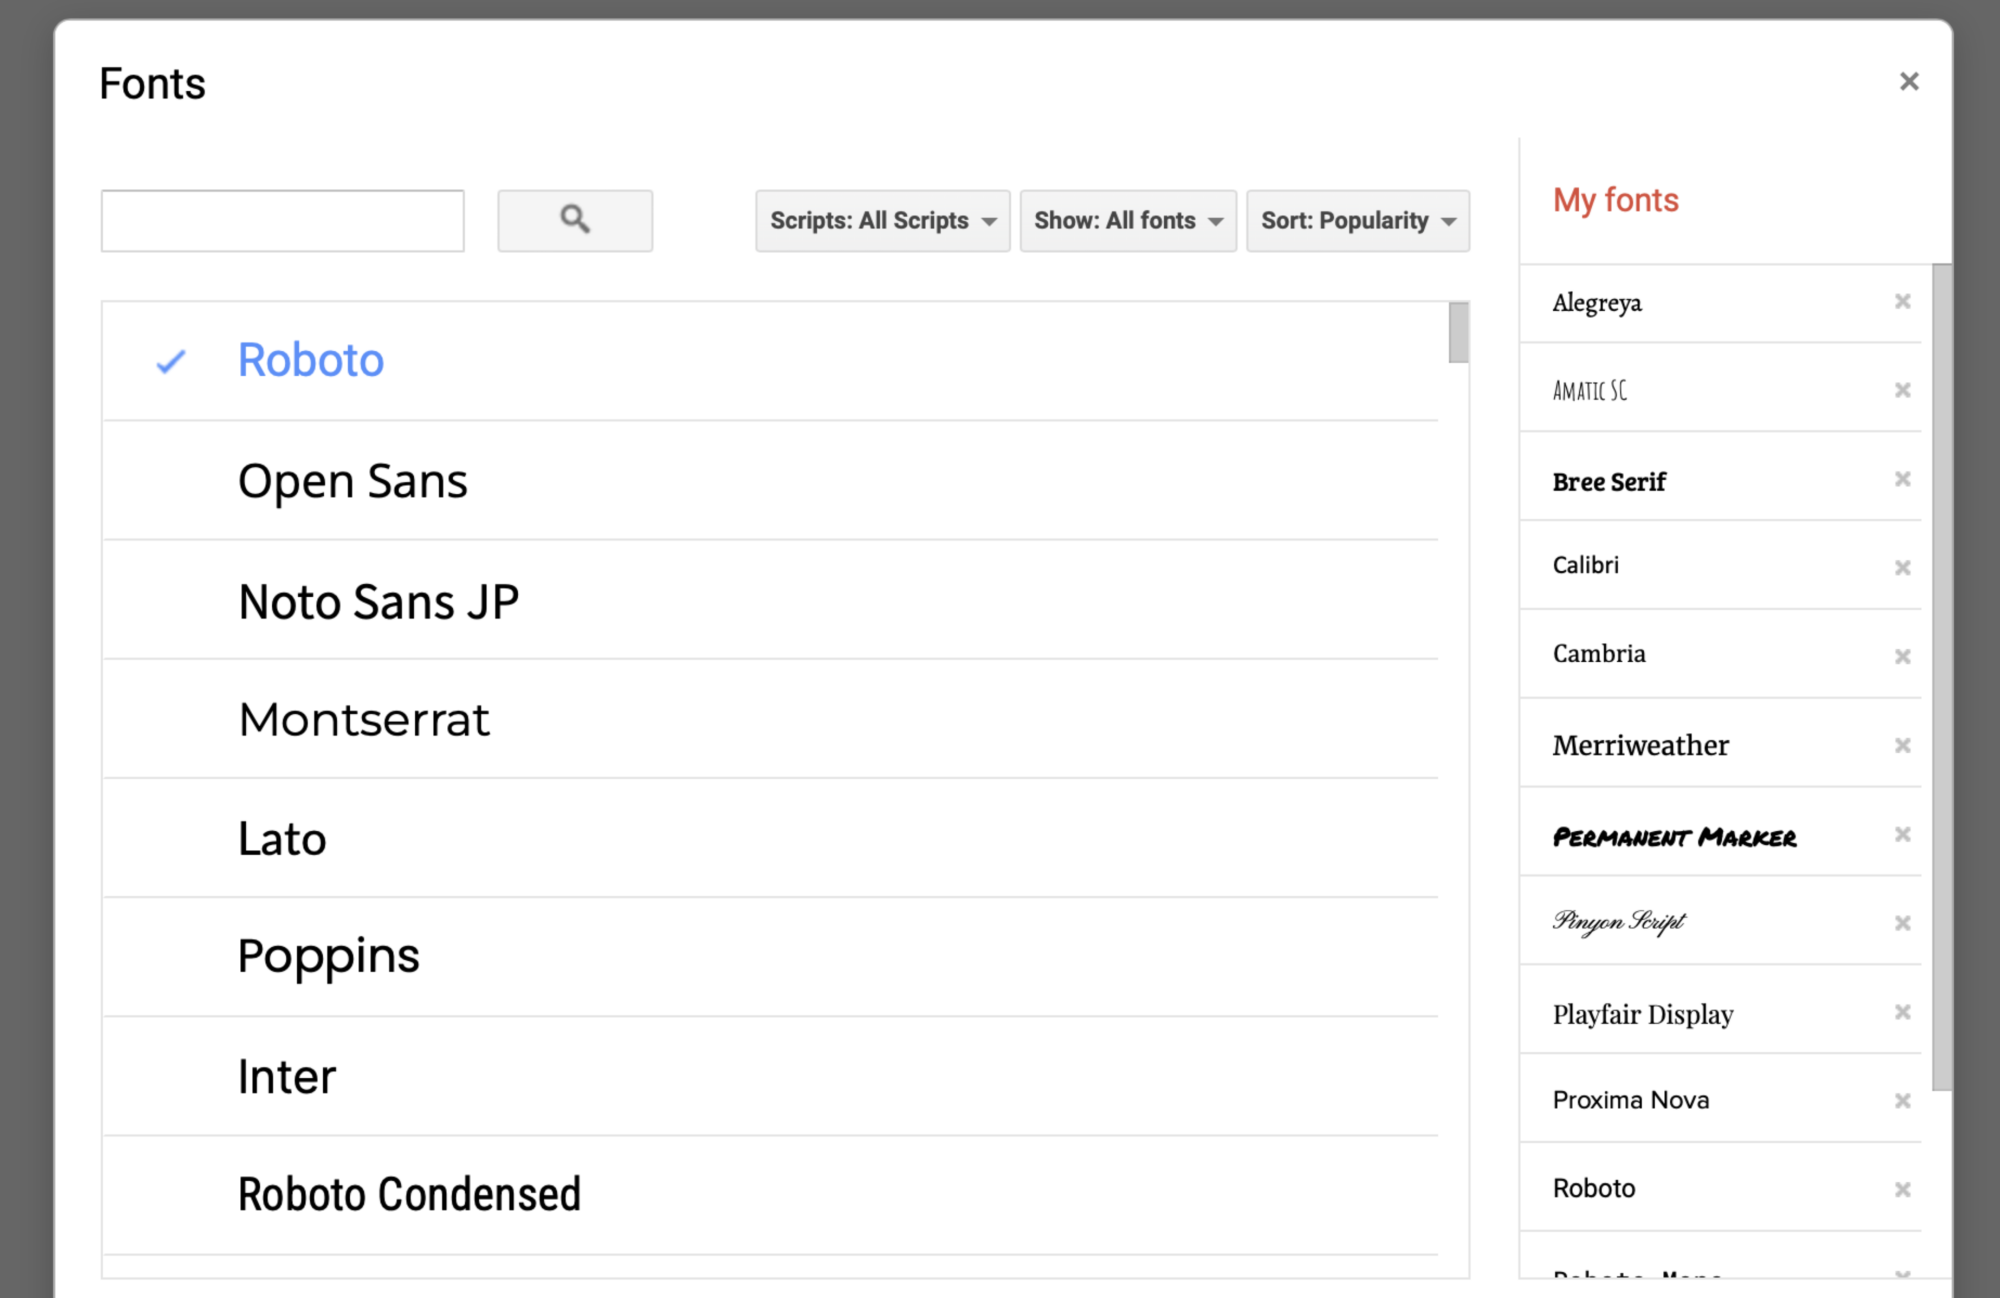 Access to 1600 fonts from inside Google Docs